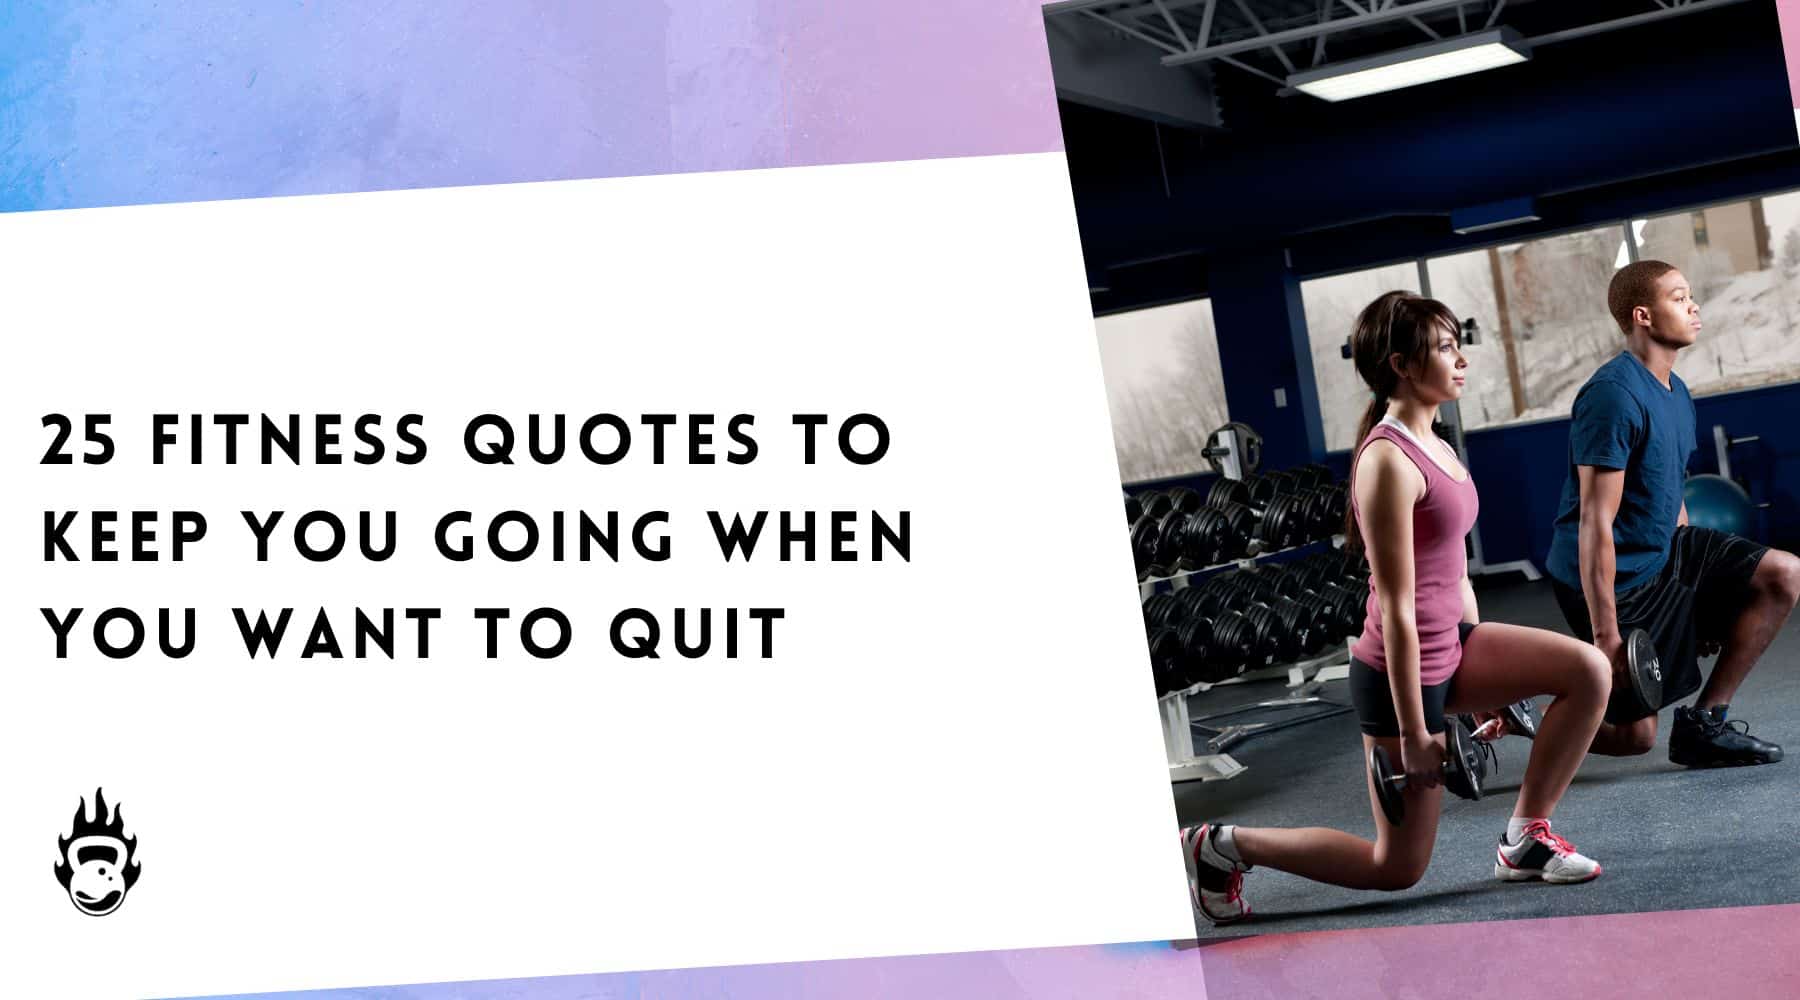 45 Motivational Workout Quotes About Fitness and the Gym